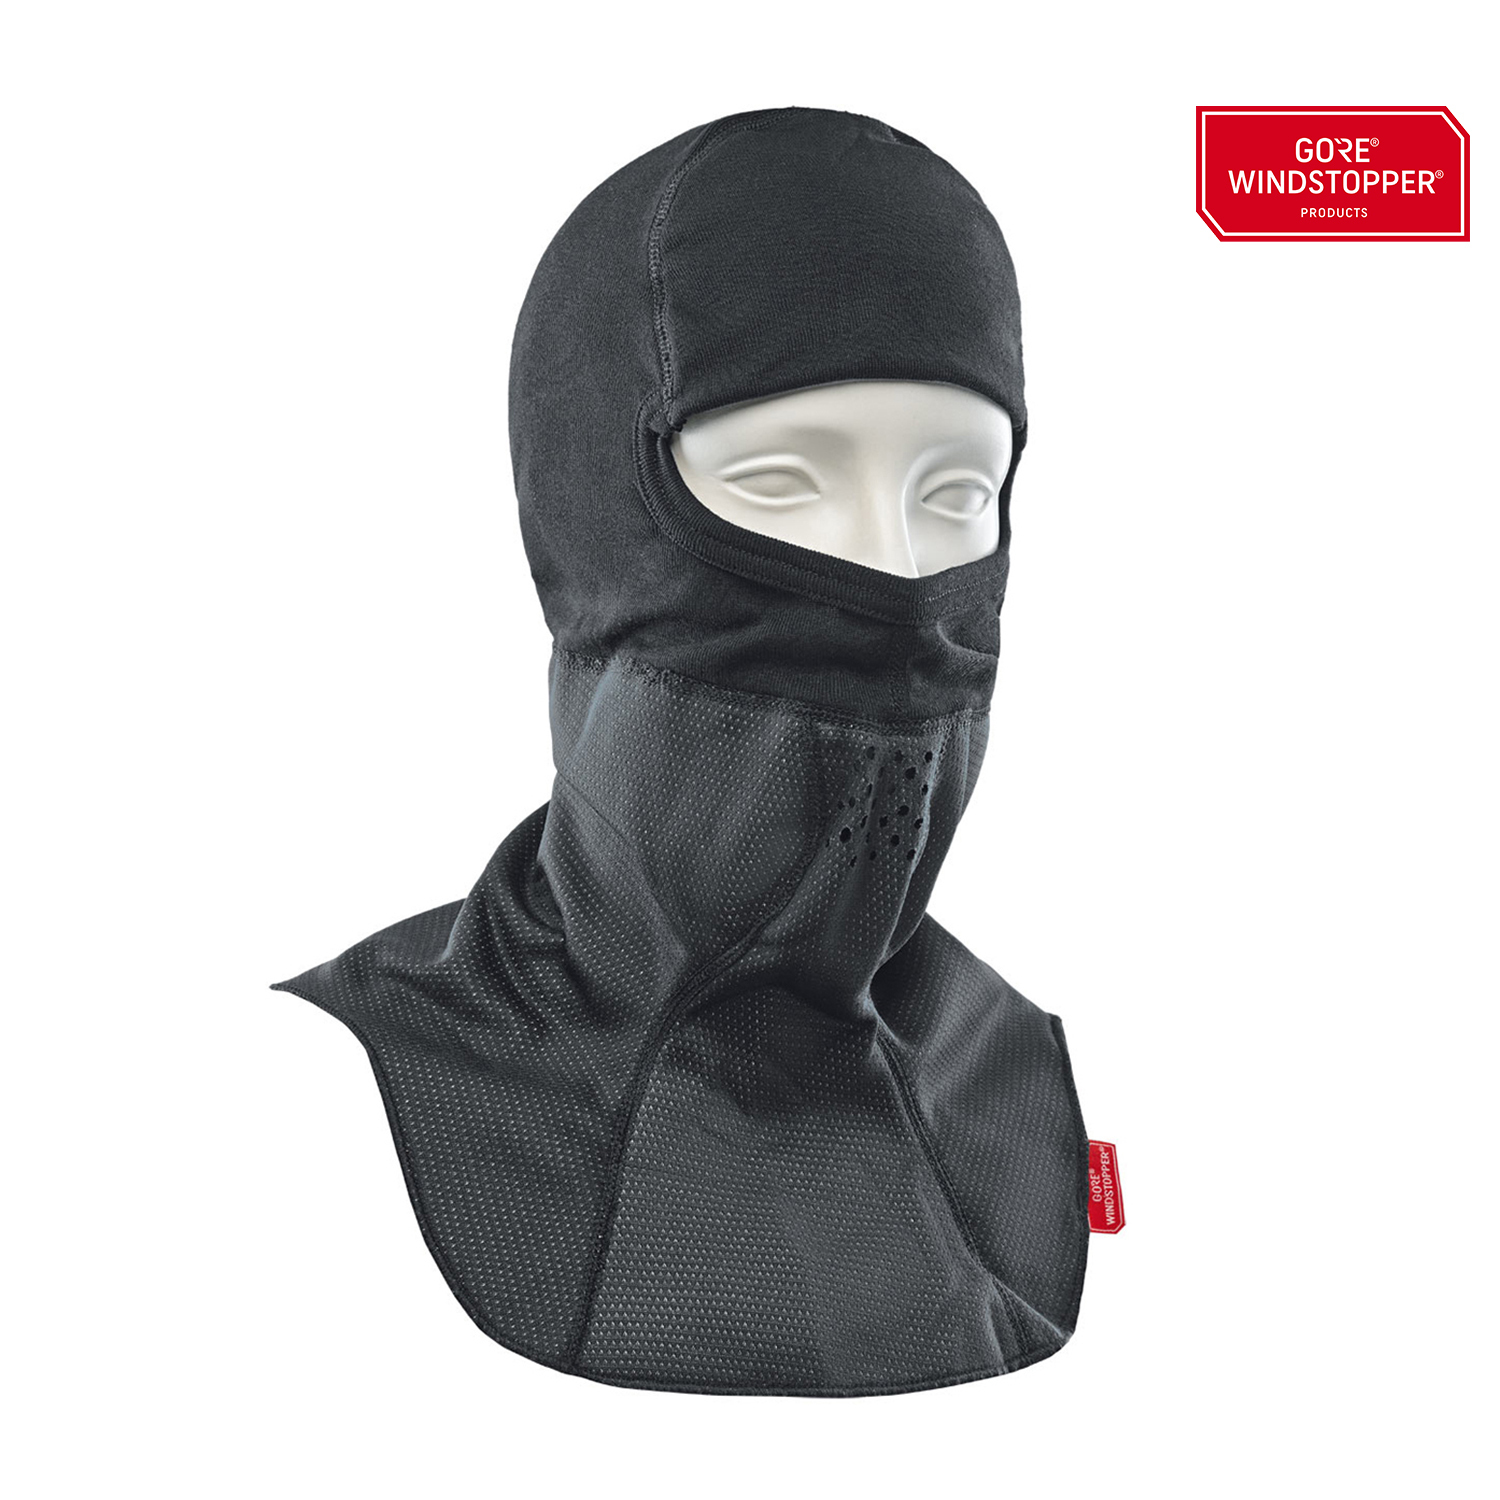 Held Balaclava Neck Warmer - Available in Various Sizes